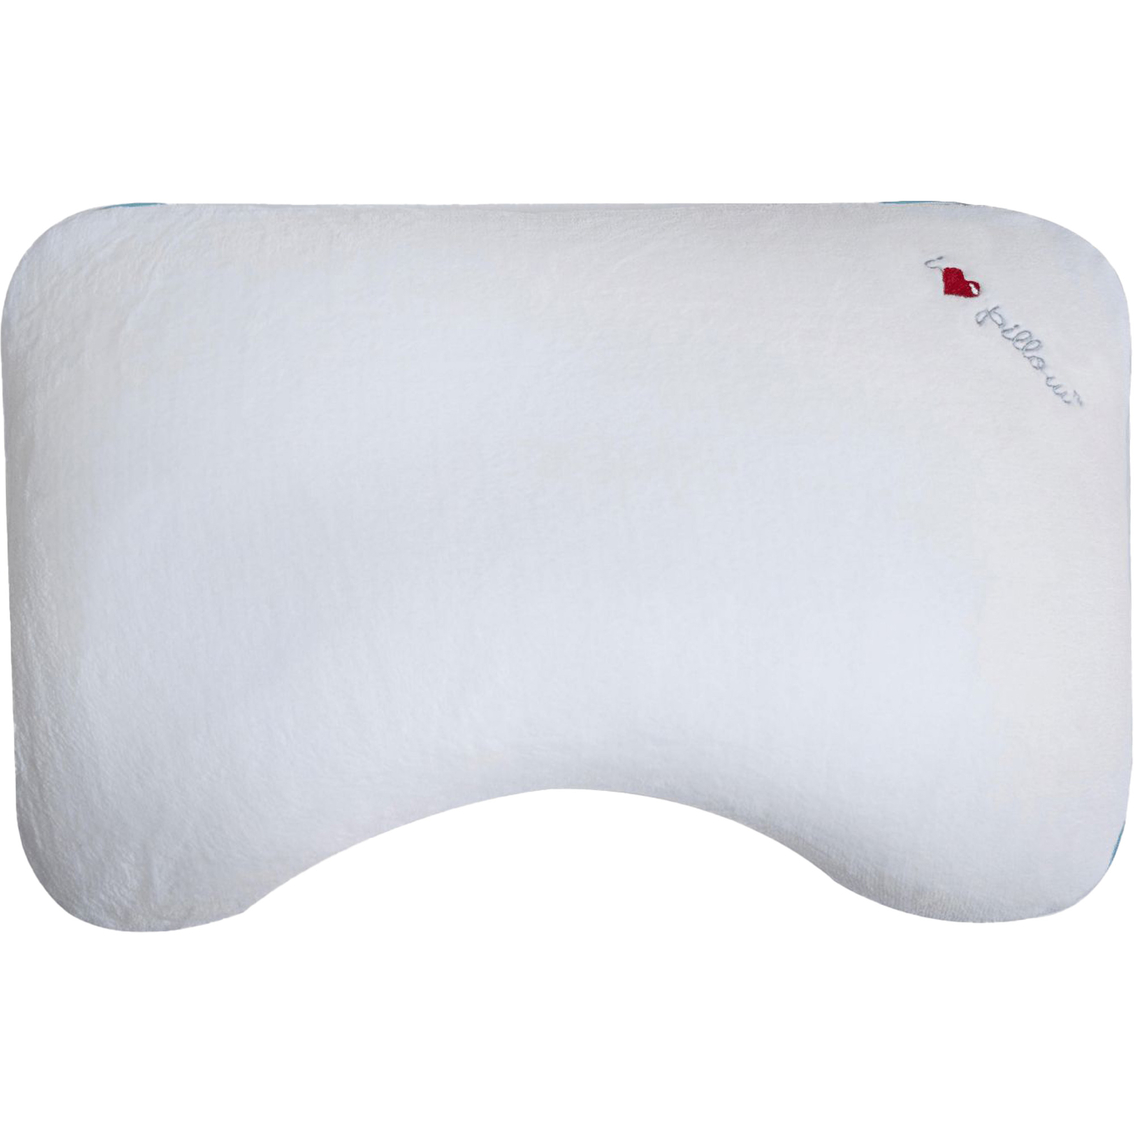 I Love Pillow Out Cold Queen Side Sleeper Pillow - Image 2 of 3